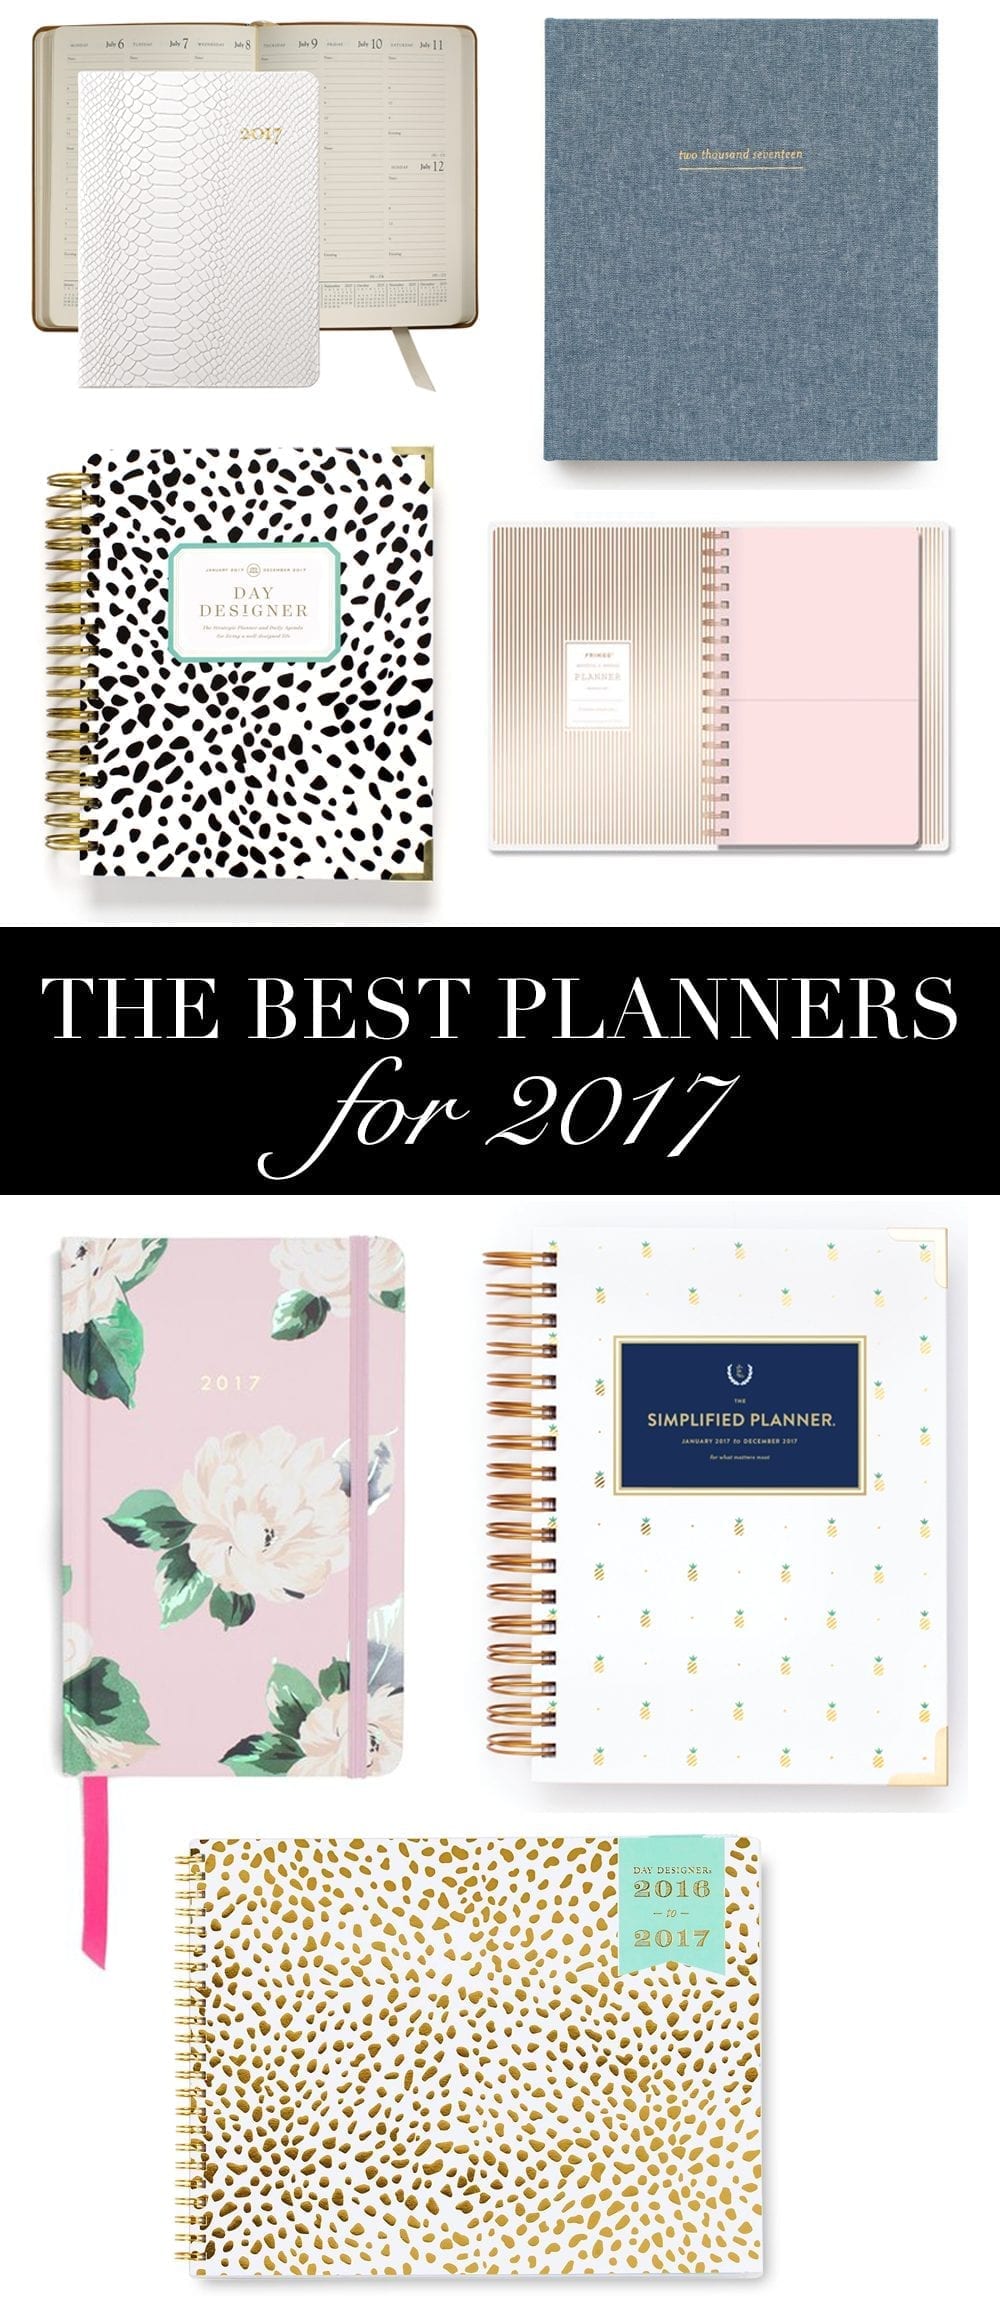 Best Planners For 2017, 2017 Planners. The Best Planners for 2017, Cute 2017 Planners, Adorable 2017 Planners